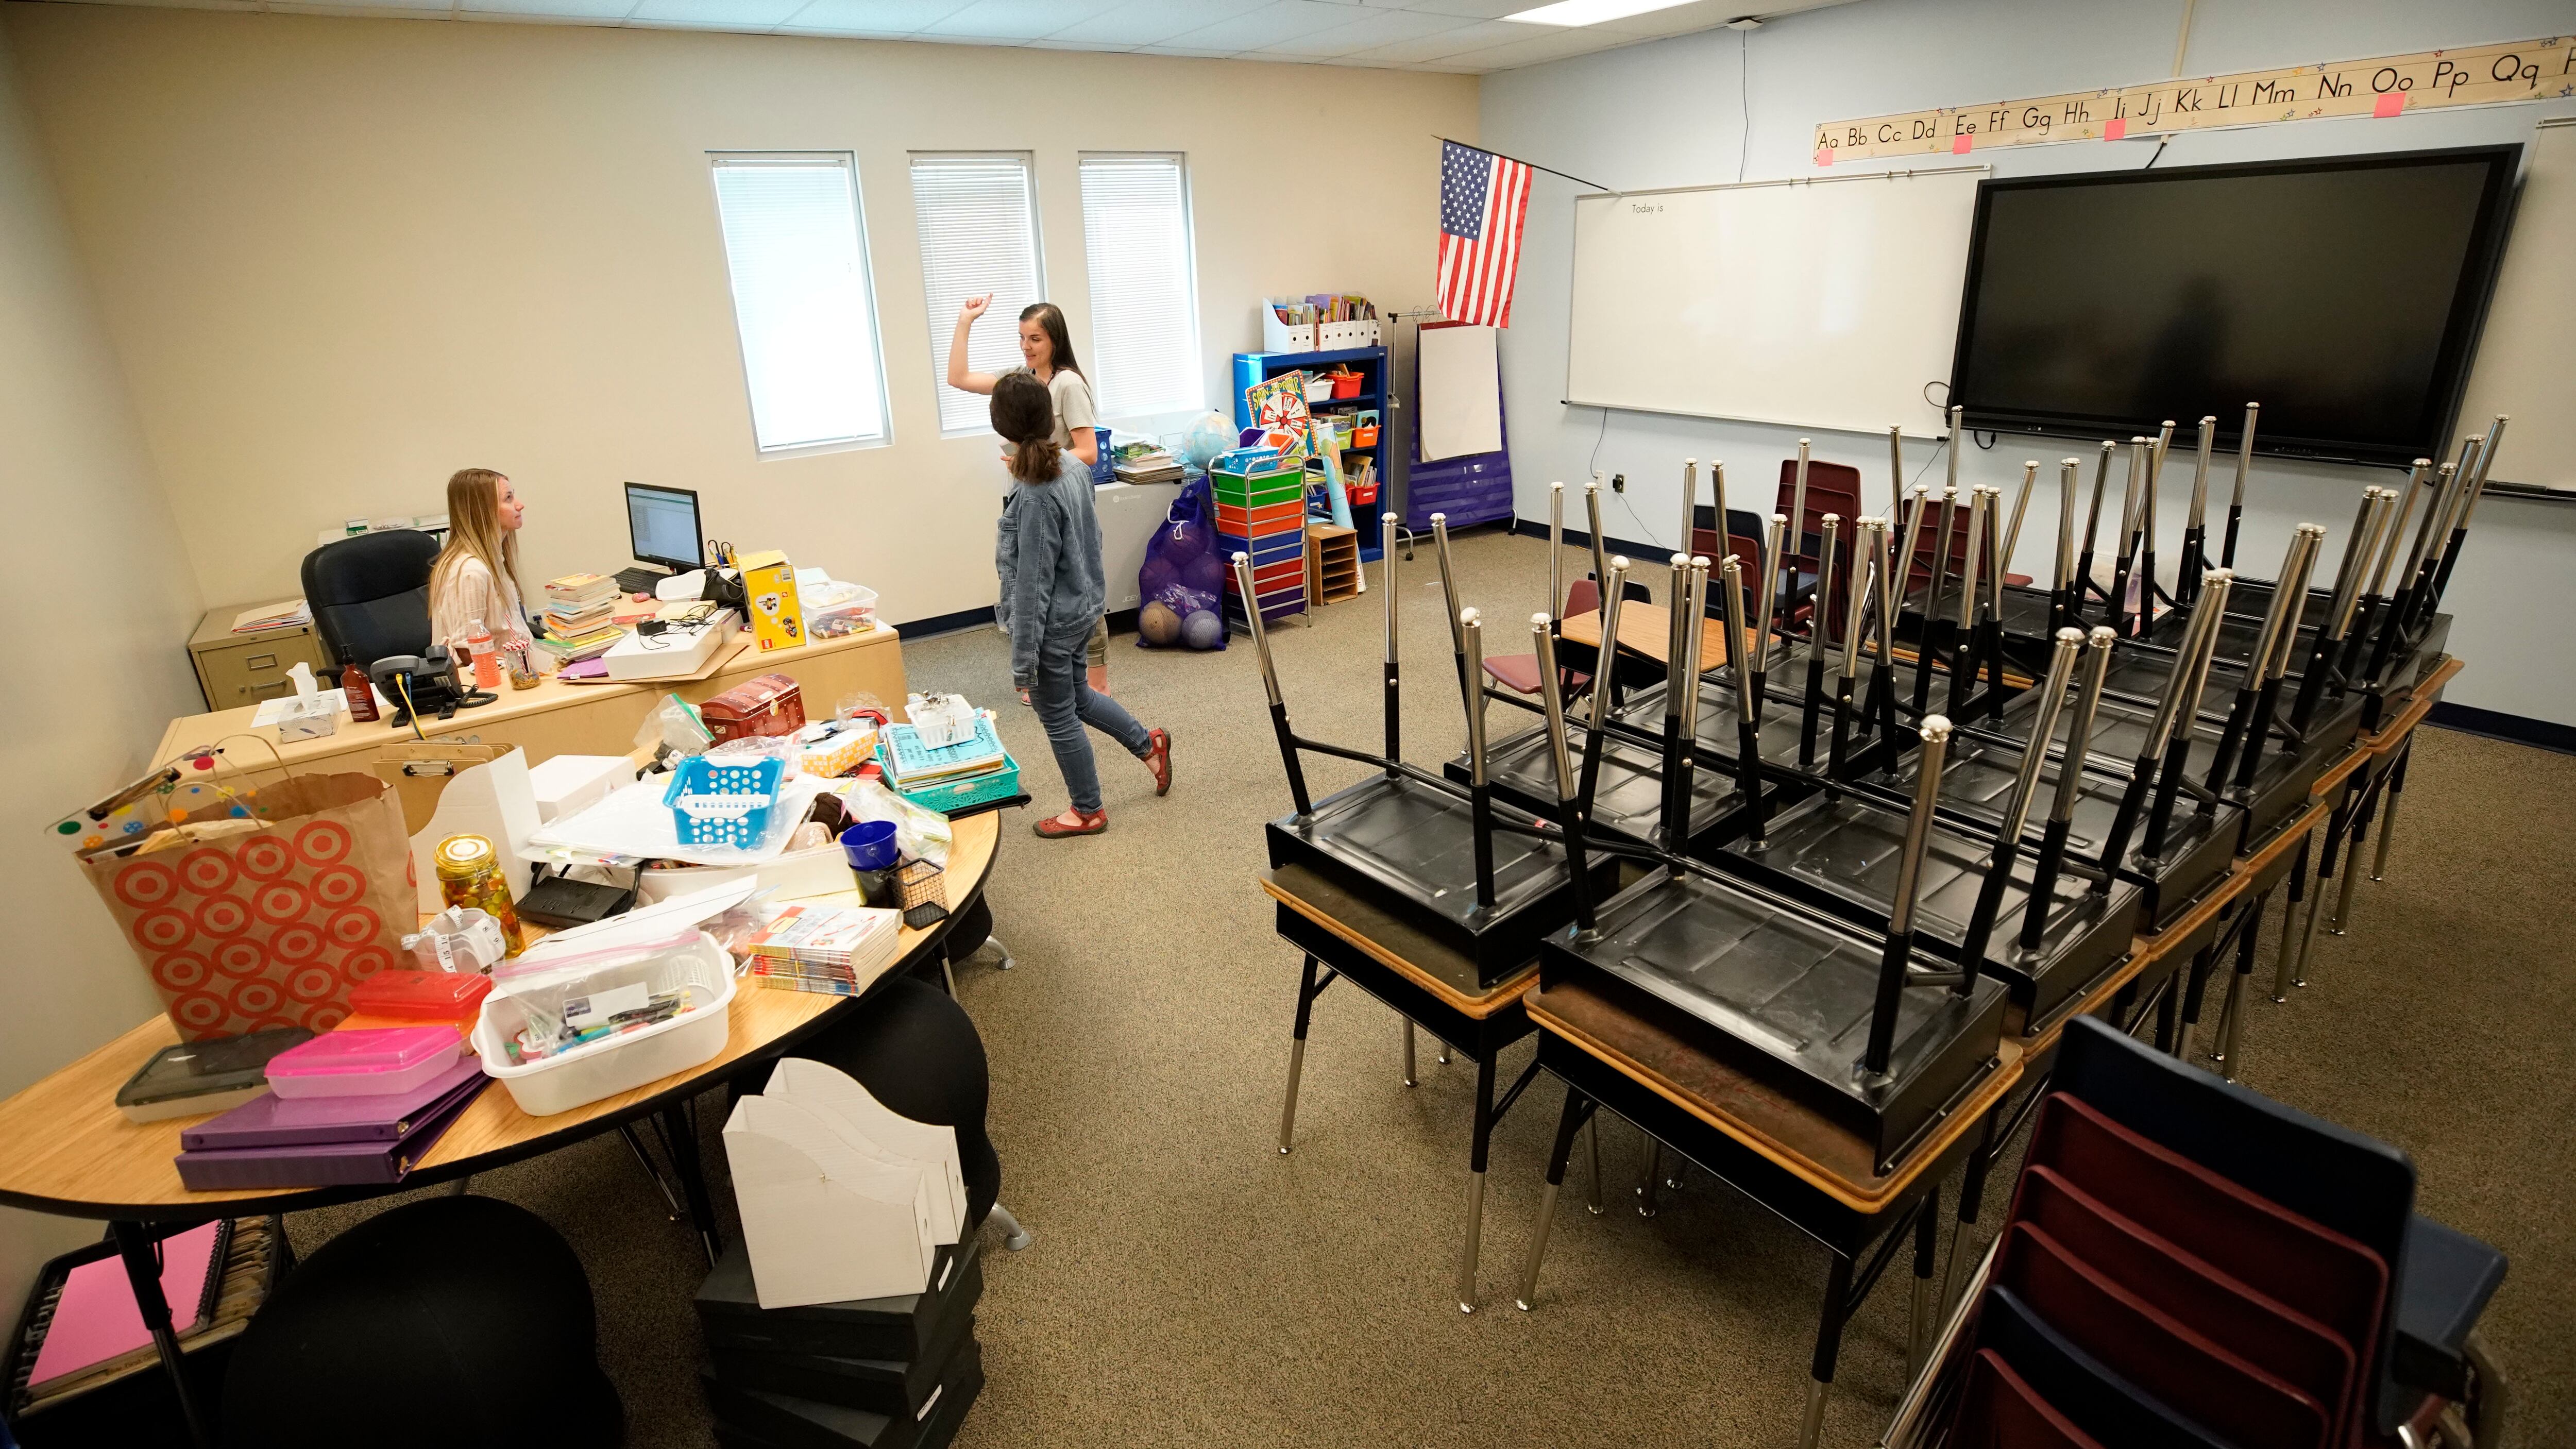 Students Pick Up Personal Belongings As Teachers Clean Out Classrooms At End Of Pandemic-Impacted School Year